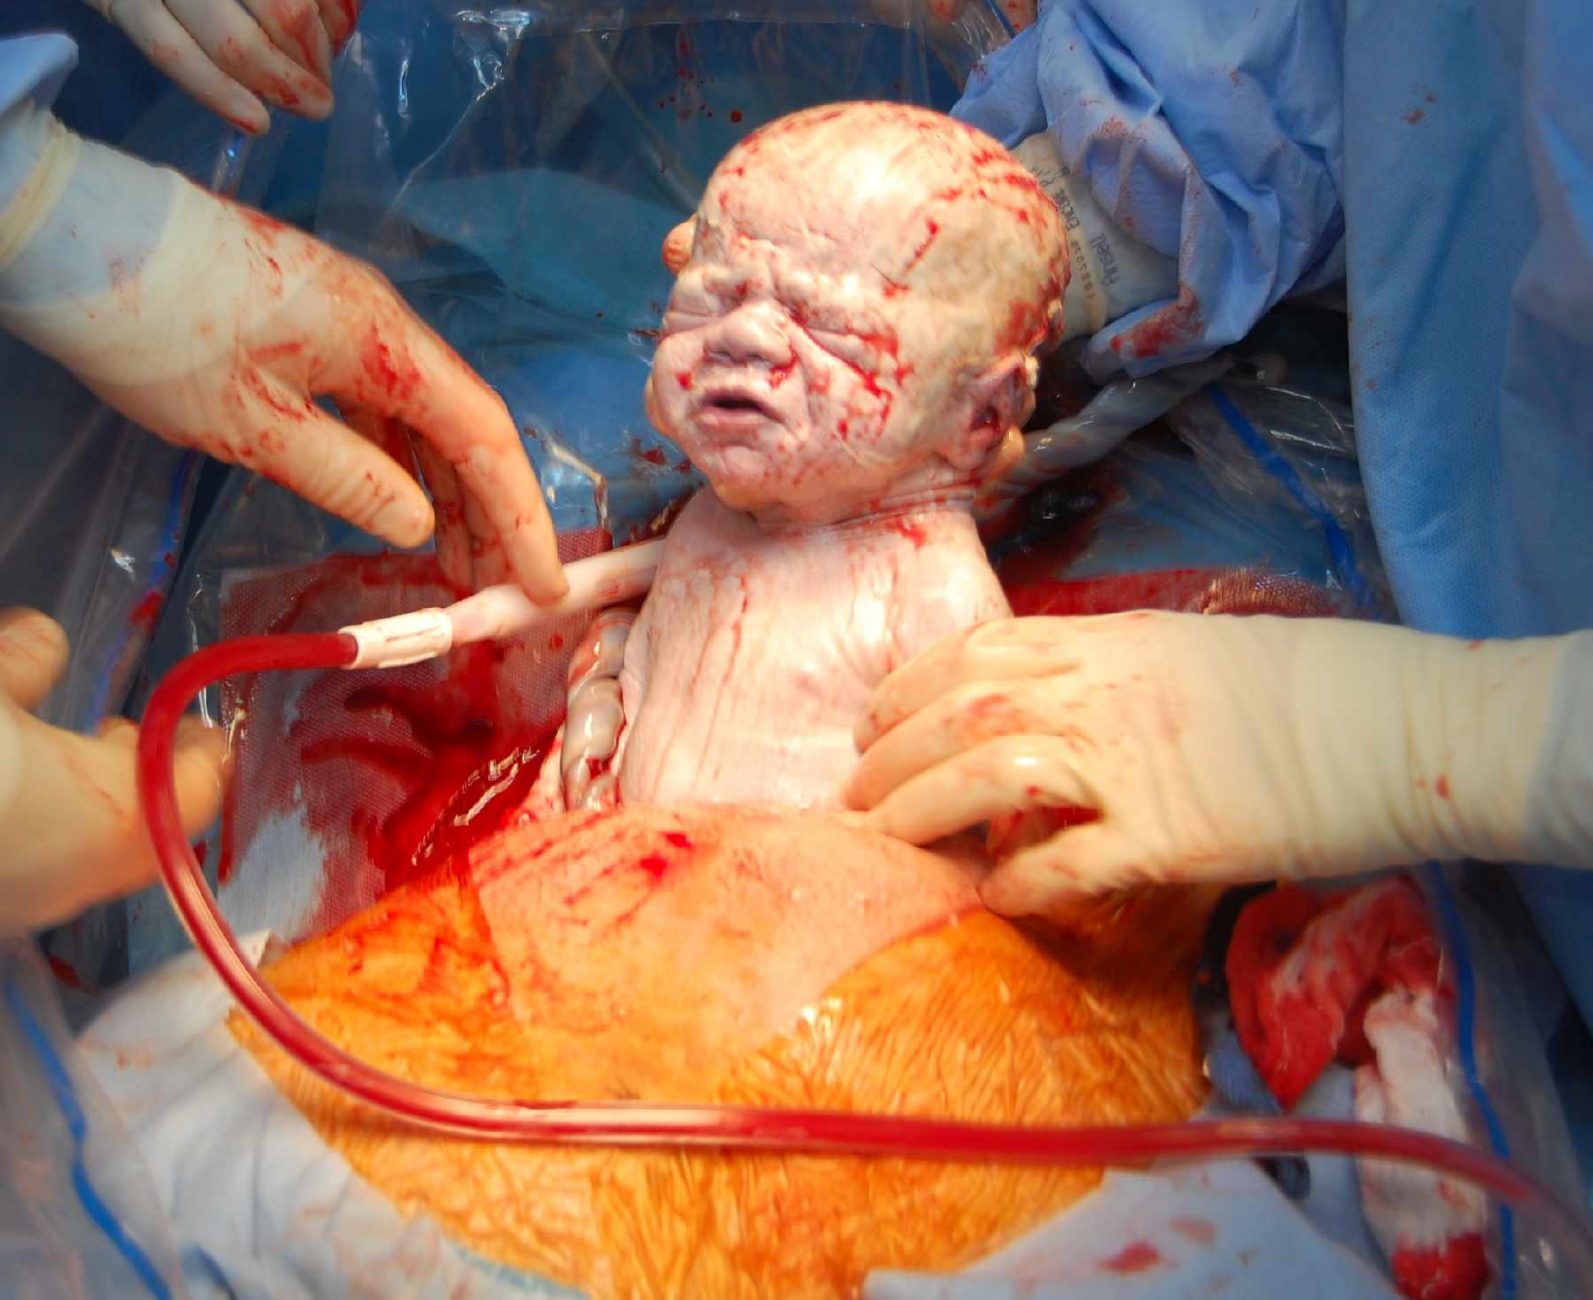 A child being born through a C-section